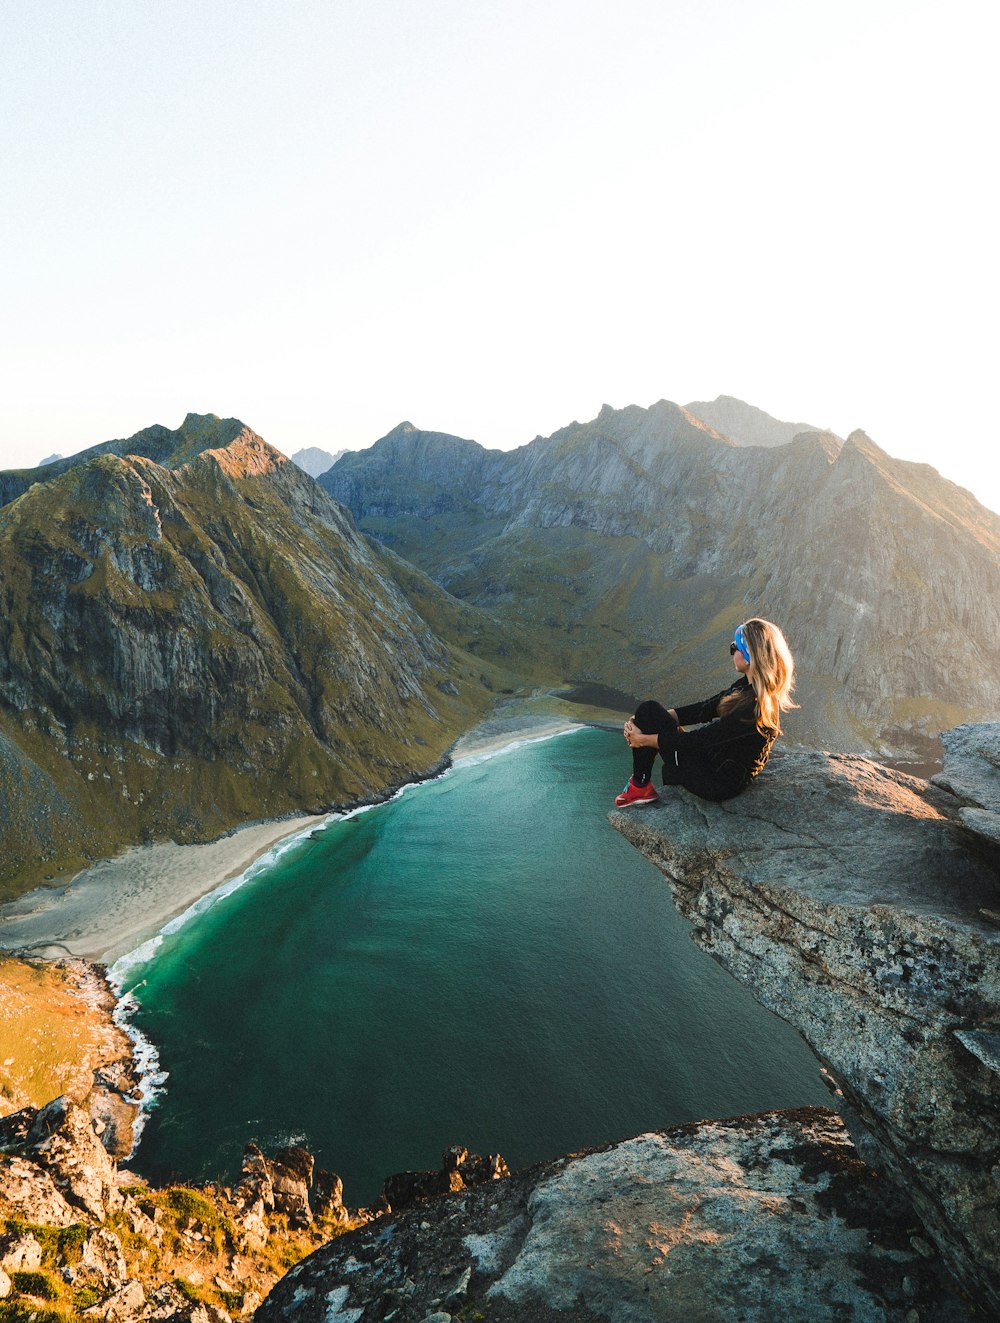 woman sitting on cliff overlooking body of water near mountains during daytime